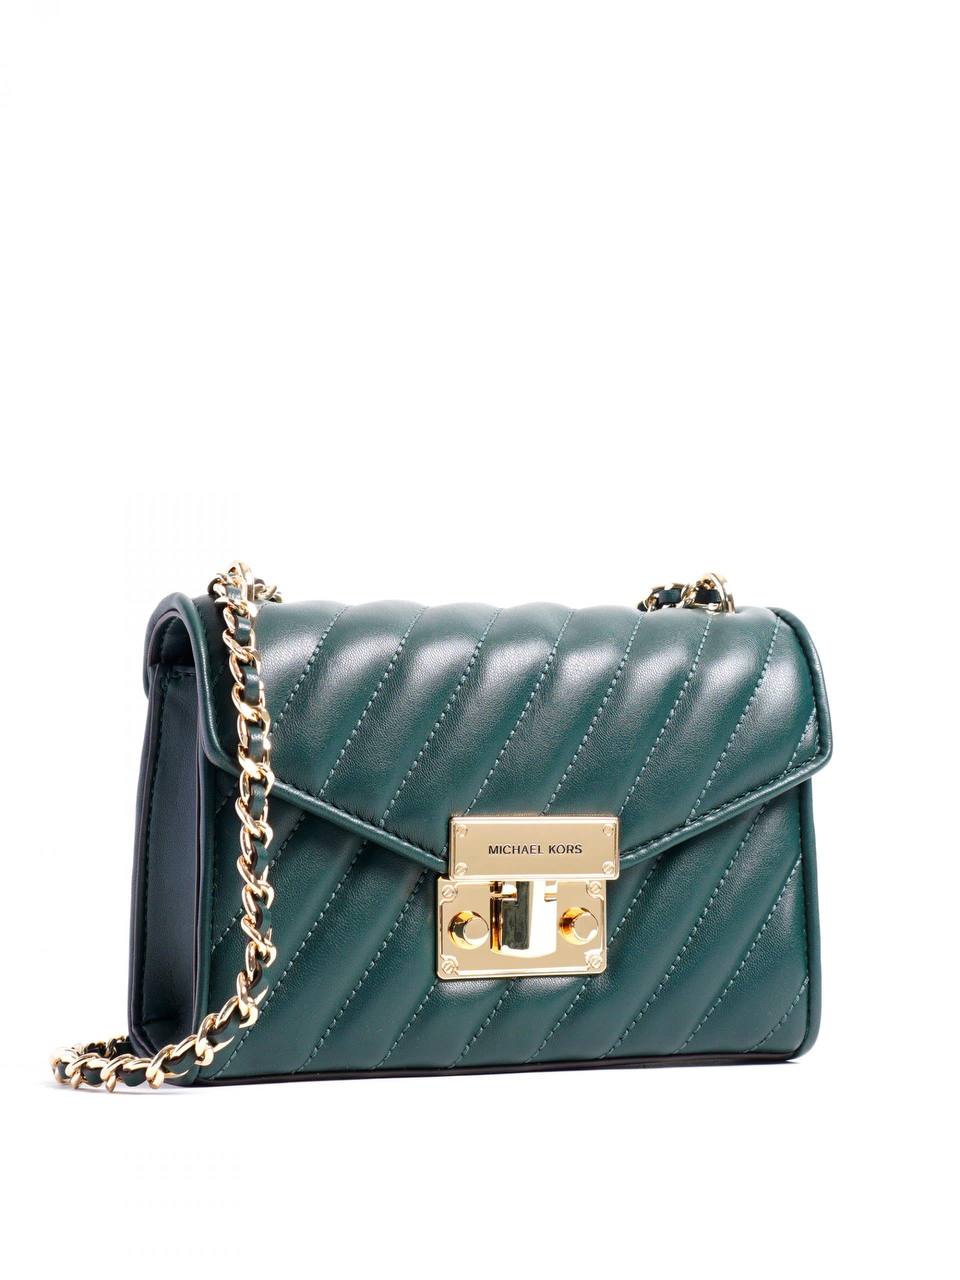 Michael Kors Rose Quilted Small Crossbody in Racing Green - Amory